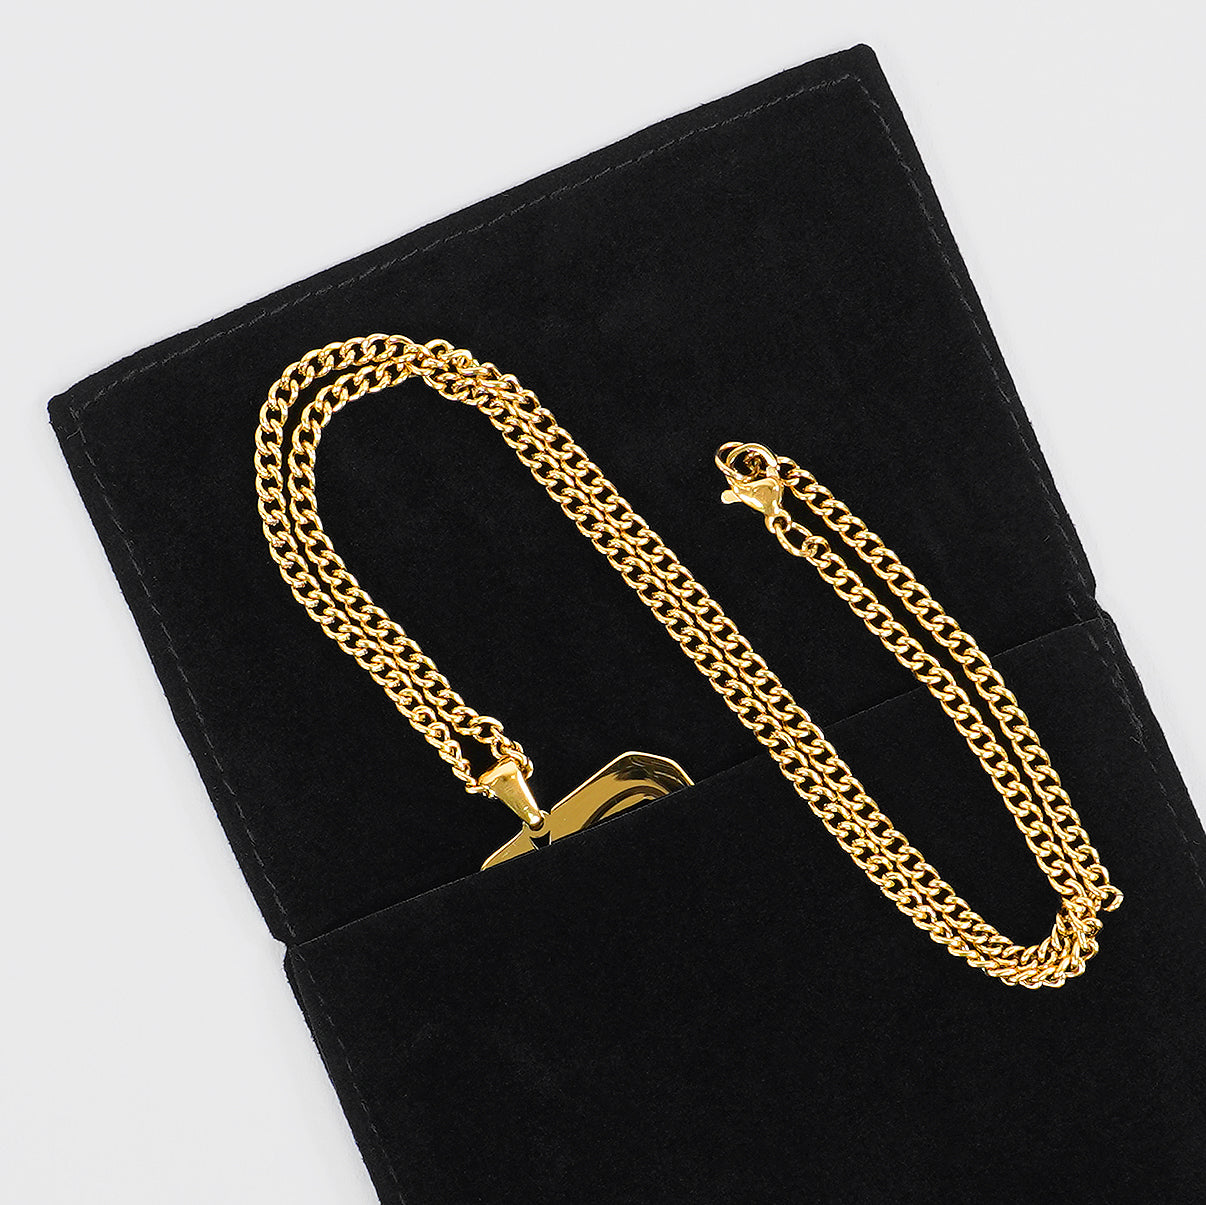 24 Number Pendant with Chain Necklace - Gold Plated Stainless Steel